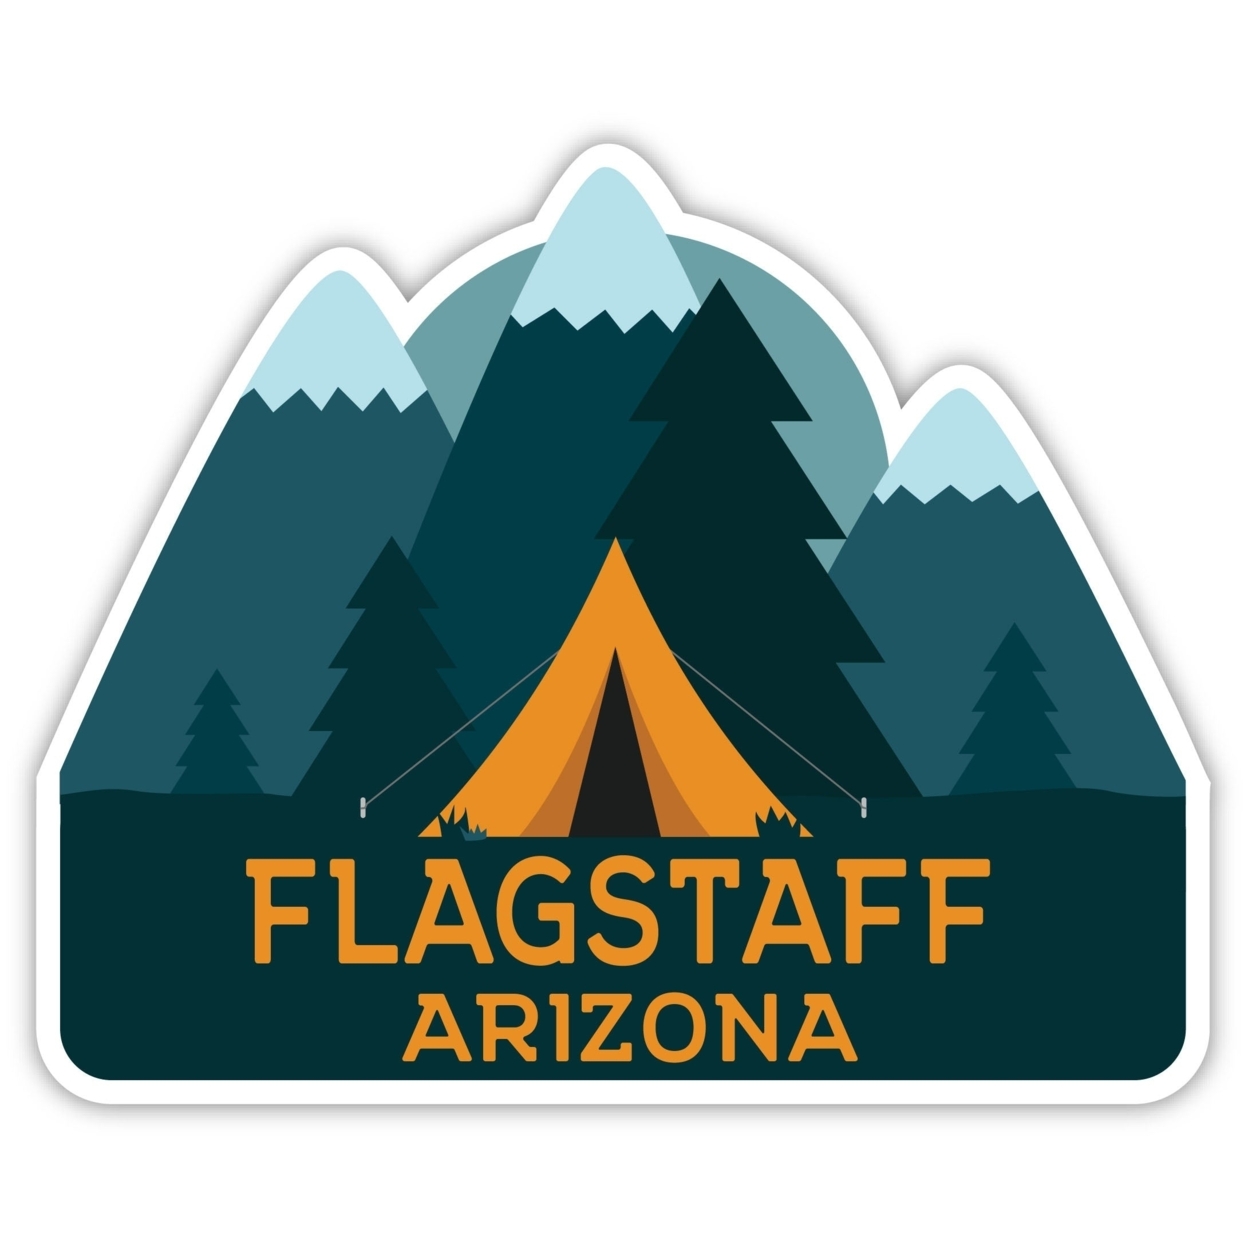 Flagstaff Arizona Souvenir Decorative Stickers (Choose Theme And Size) - 4-Pack, 12-Inch, Tent